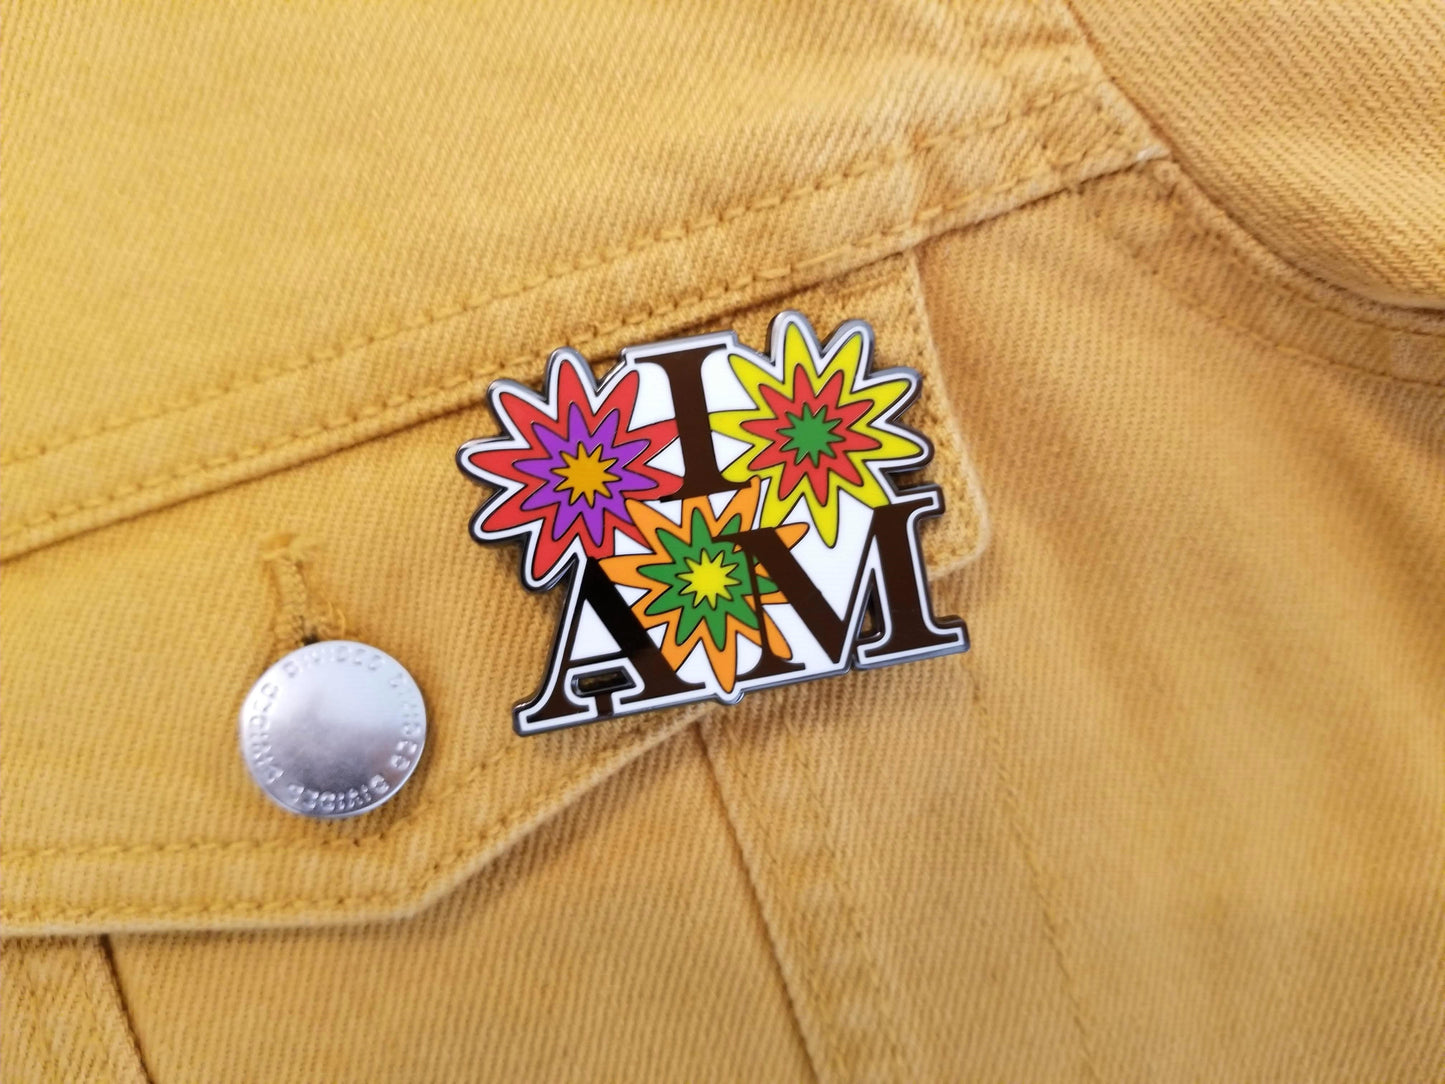 "I AM" in Bloom © Lapel Pin